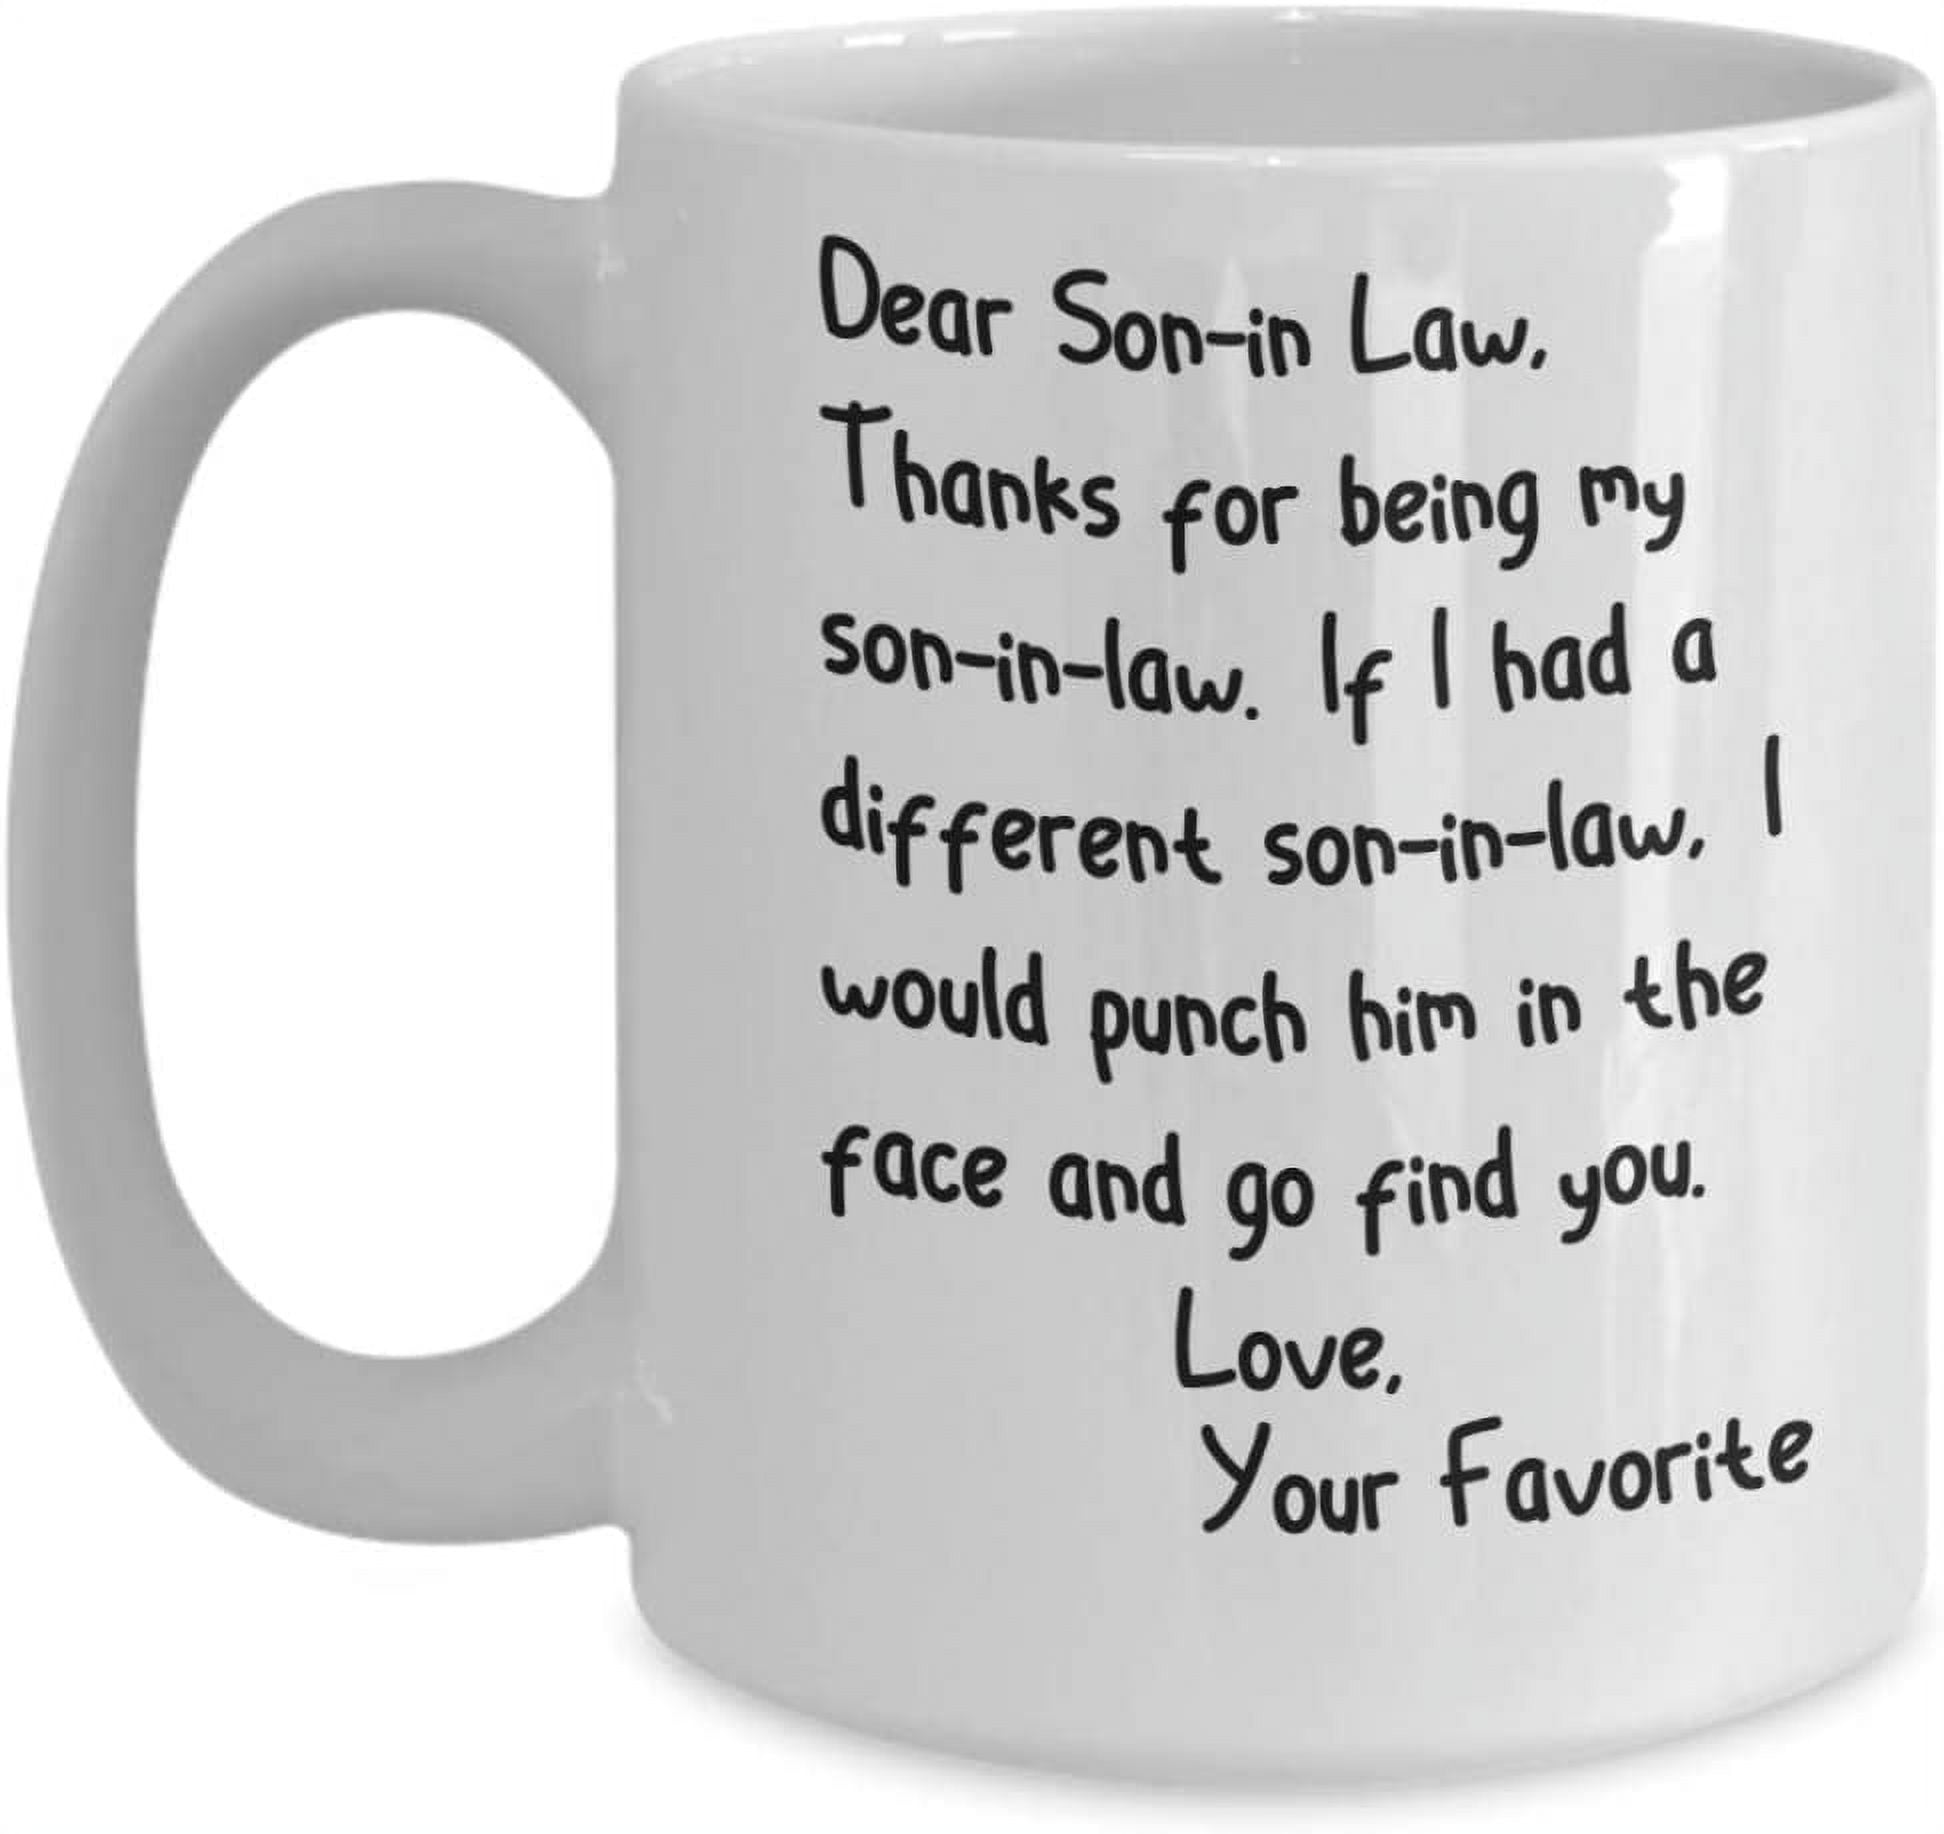 Boss Day From Assistant Coffee Mug You're So Lucky I'm your Assistant Gift  Idea For Boss Women Men Him Her From Employee Coworker Thank you Tea Cu 